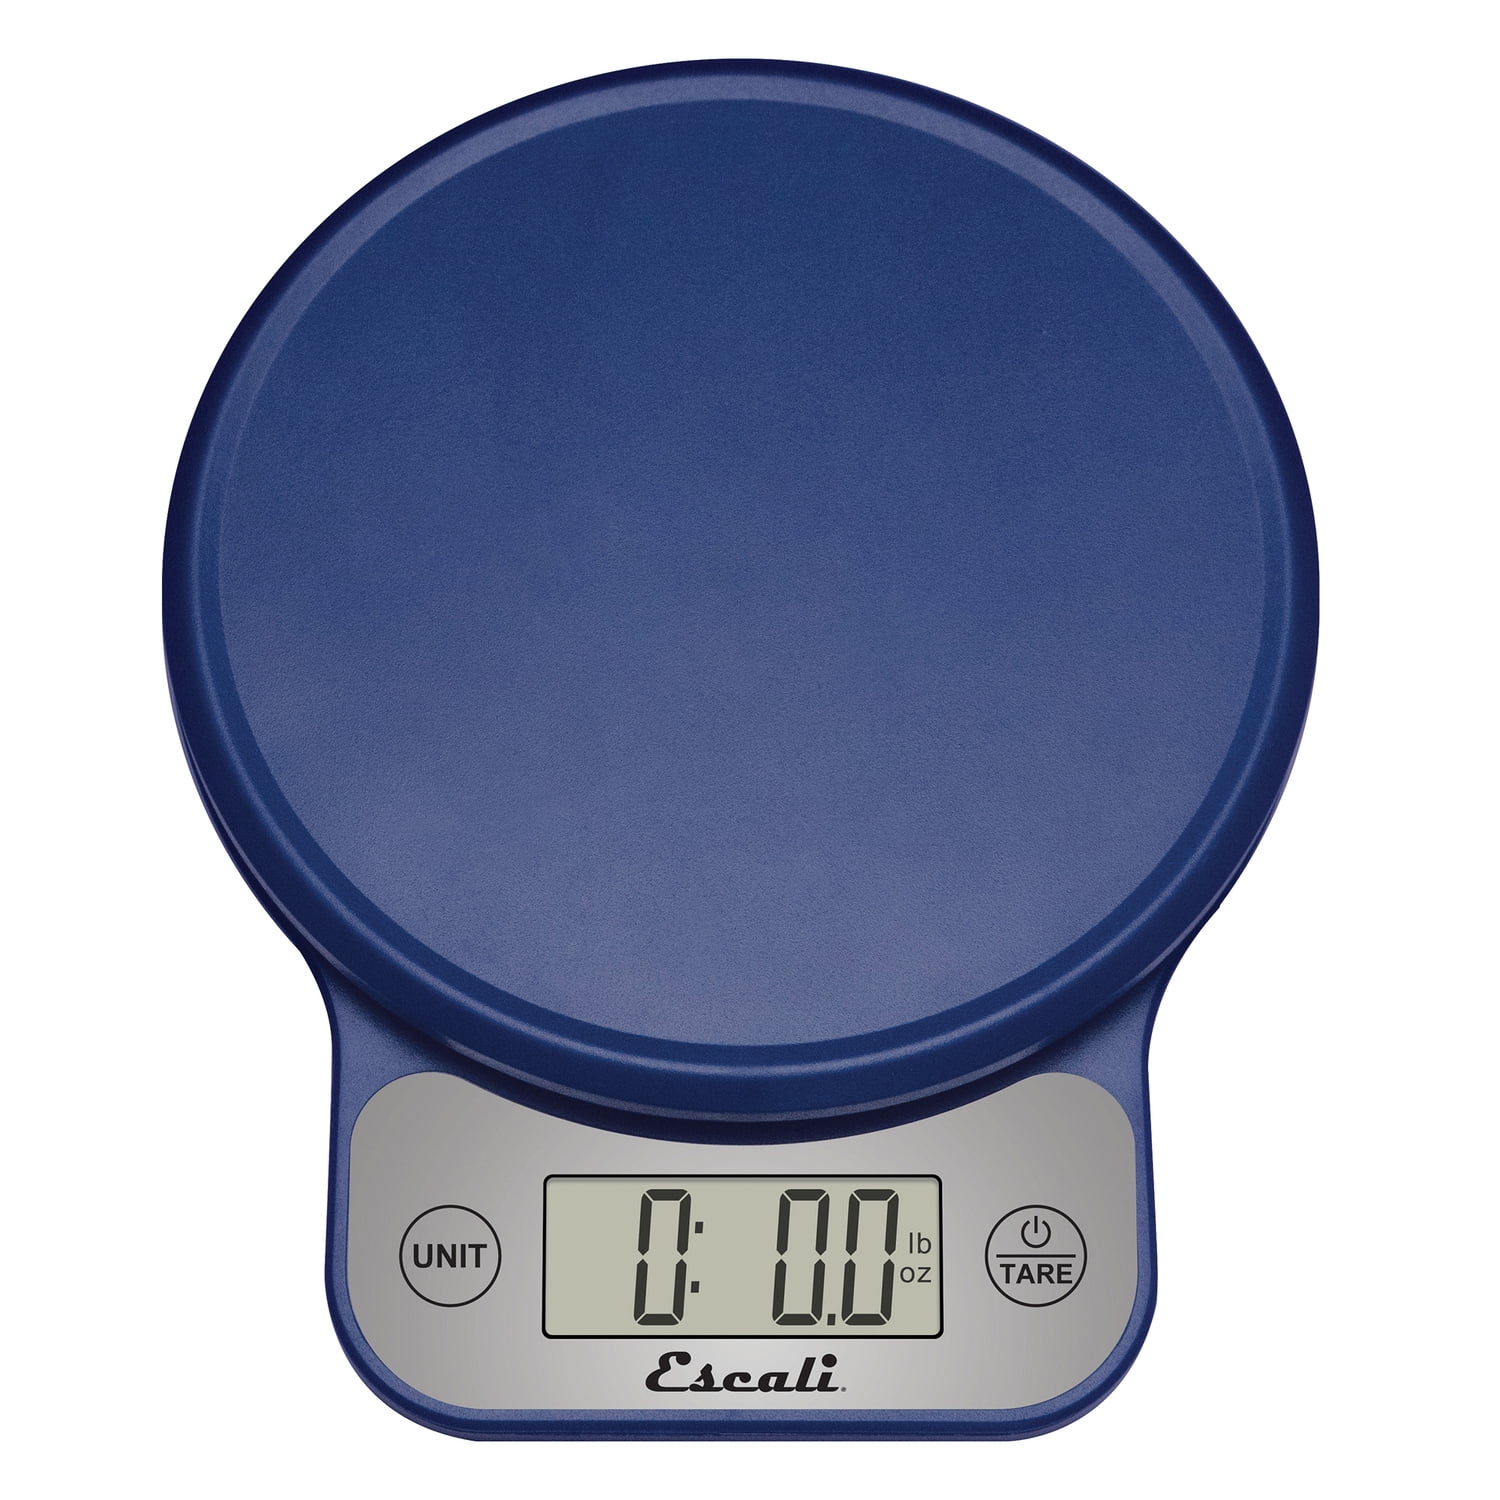 What is the Tare Feature on my Digital Kitchen Scale? – Eat Smart